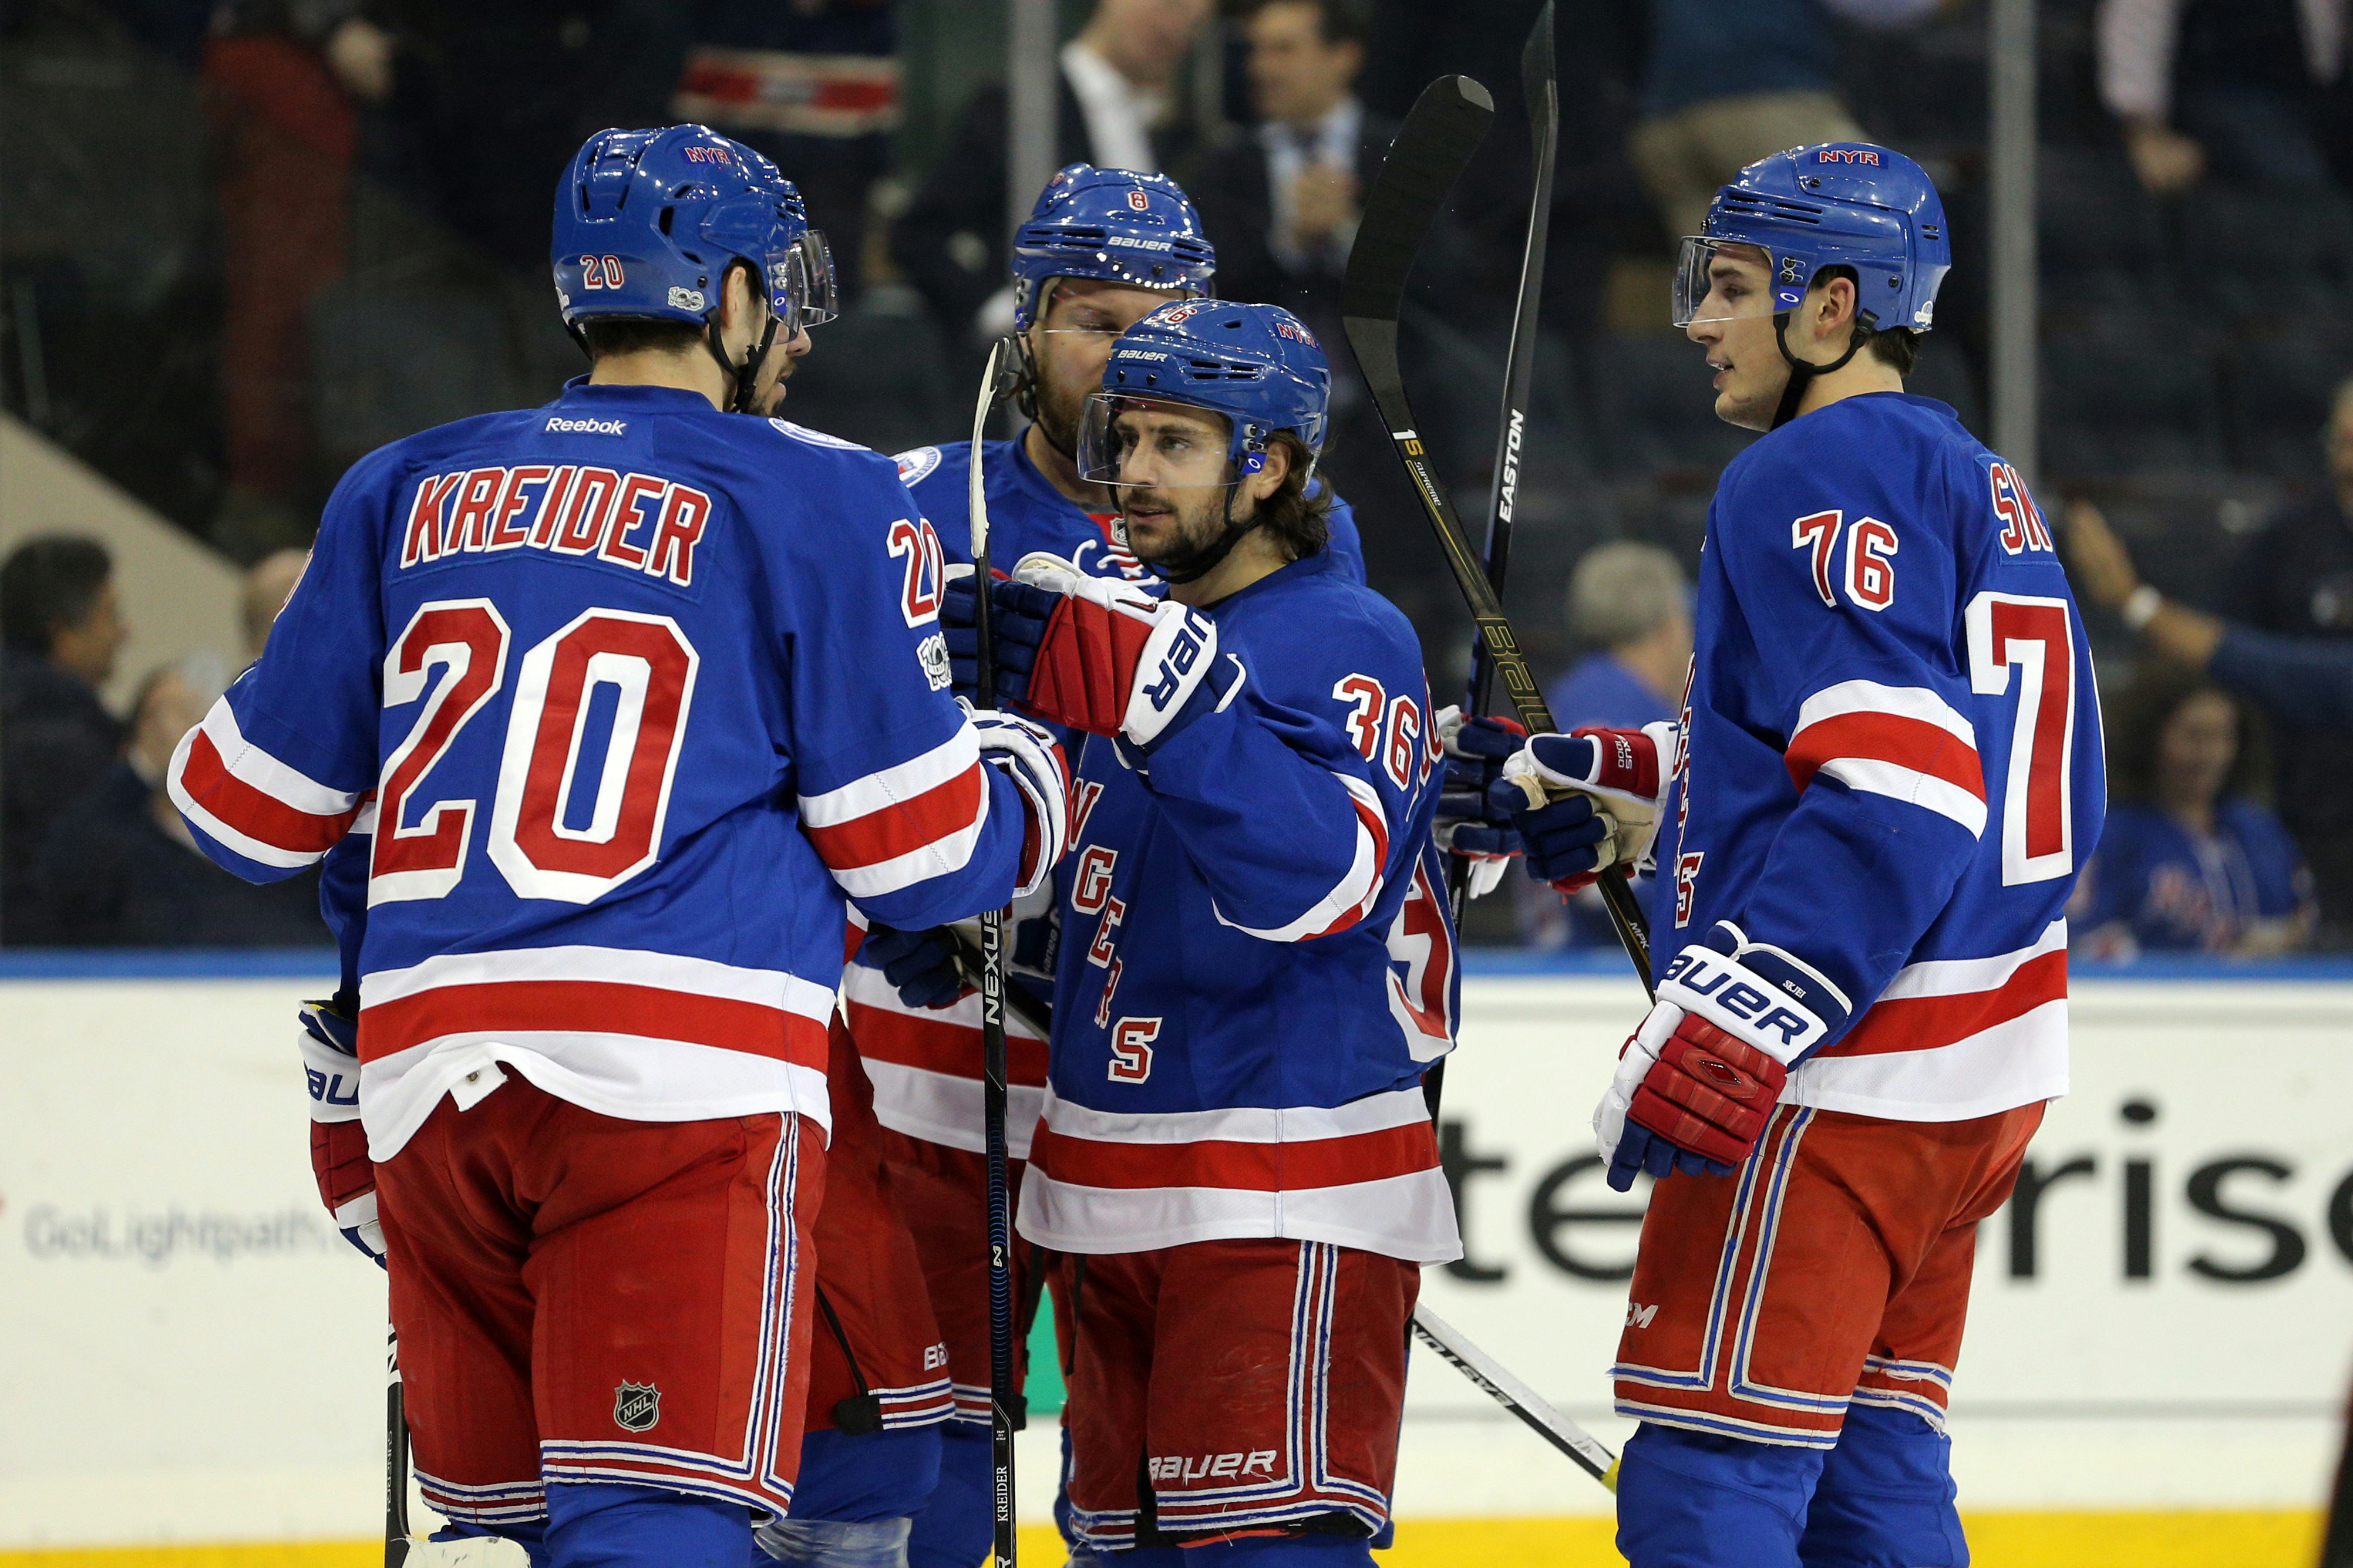 New York Rangers Best Games to Watch in our Recent History